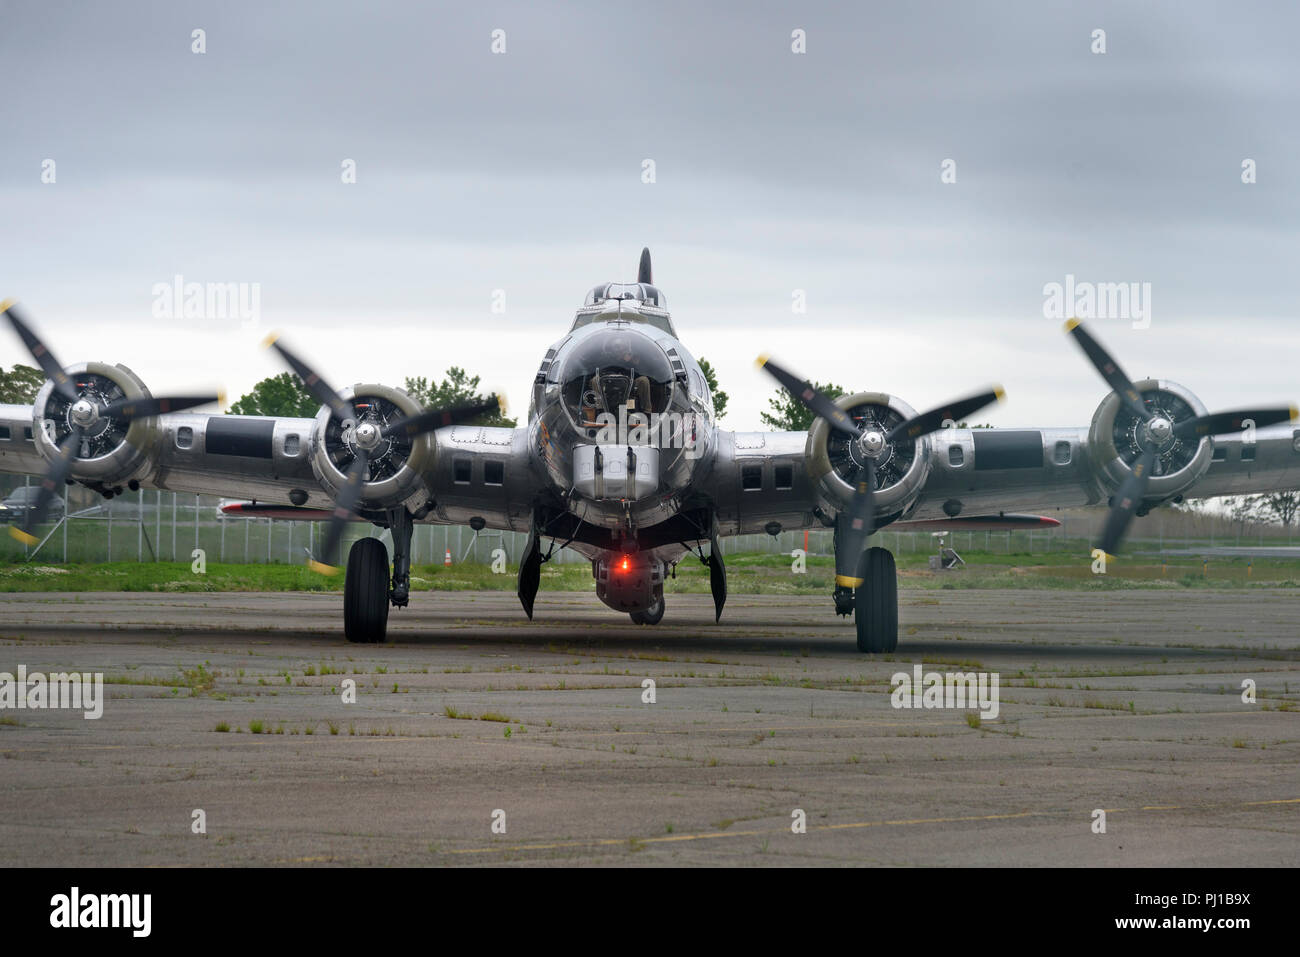 30-05-17, Stratford, Conneticut, USA. The Flying Fortress 'Yankee Lady' at Sikorski Memorial Airport. Photo: © Simon Grosset Stock Photo